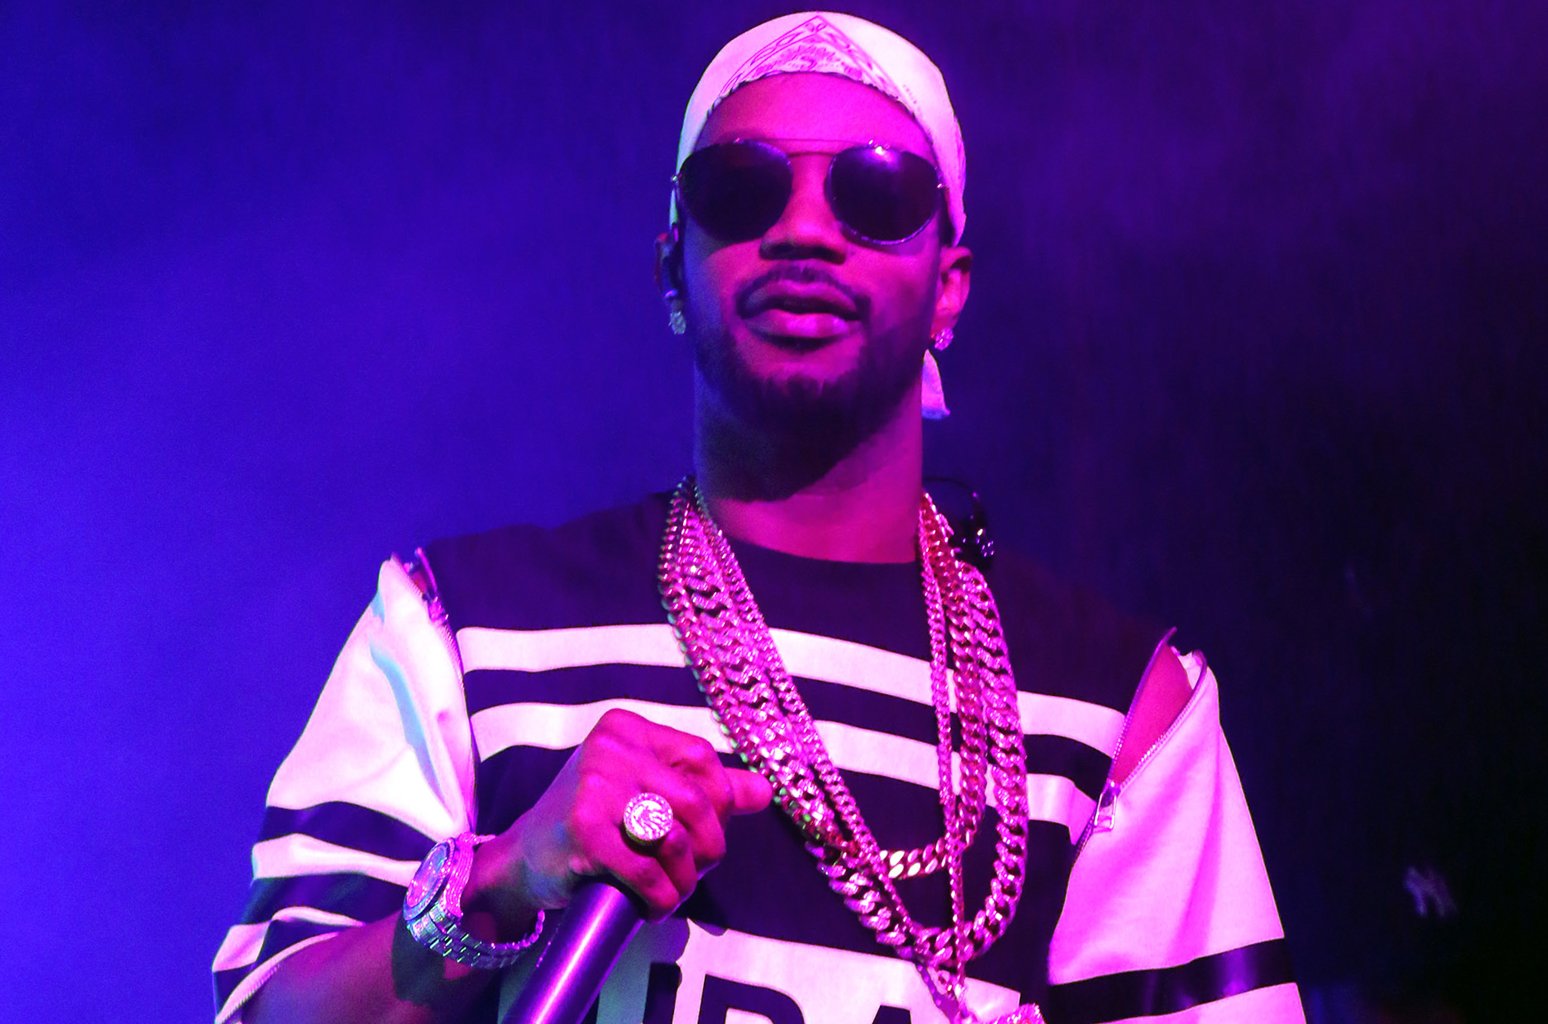  ON WITH Wishes:
Juicy J A Happy Birthday! 